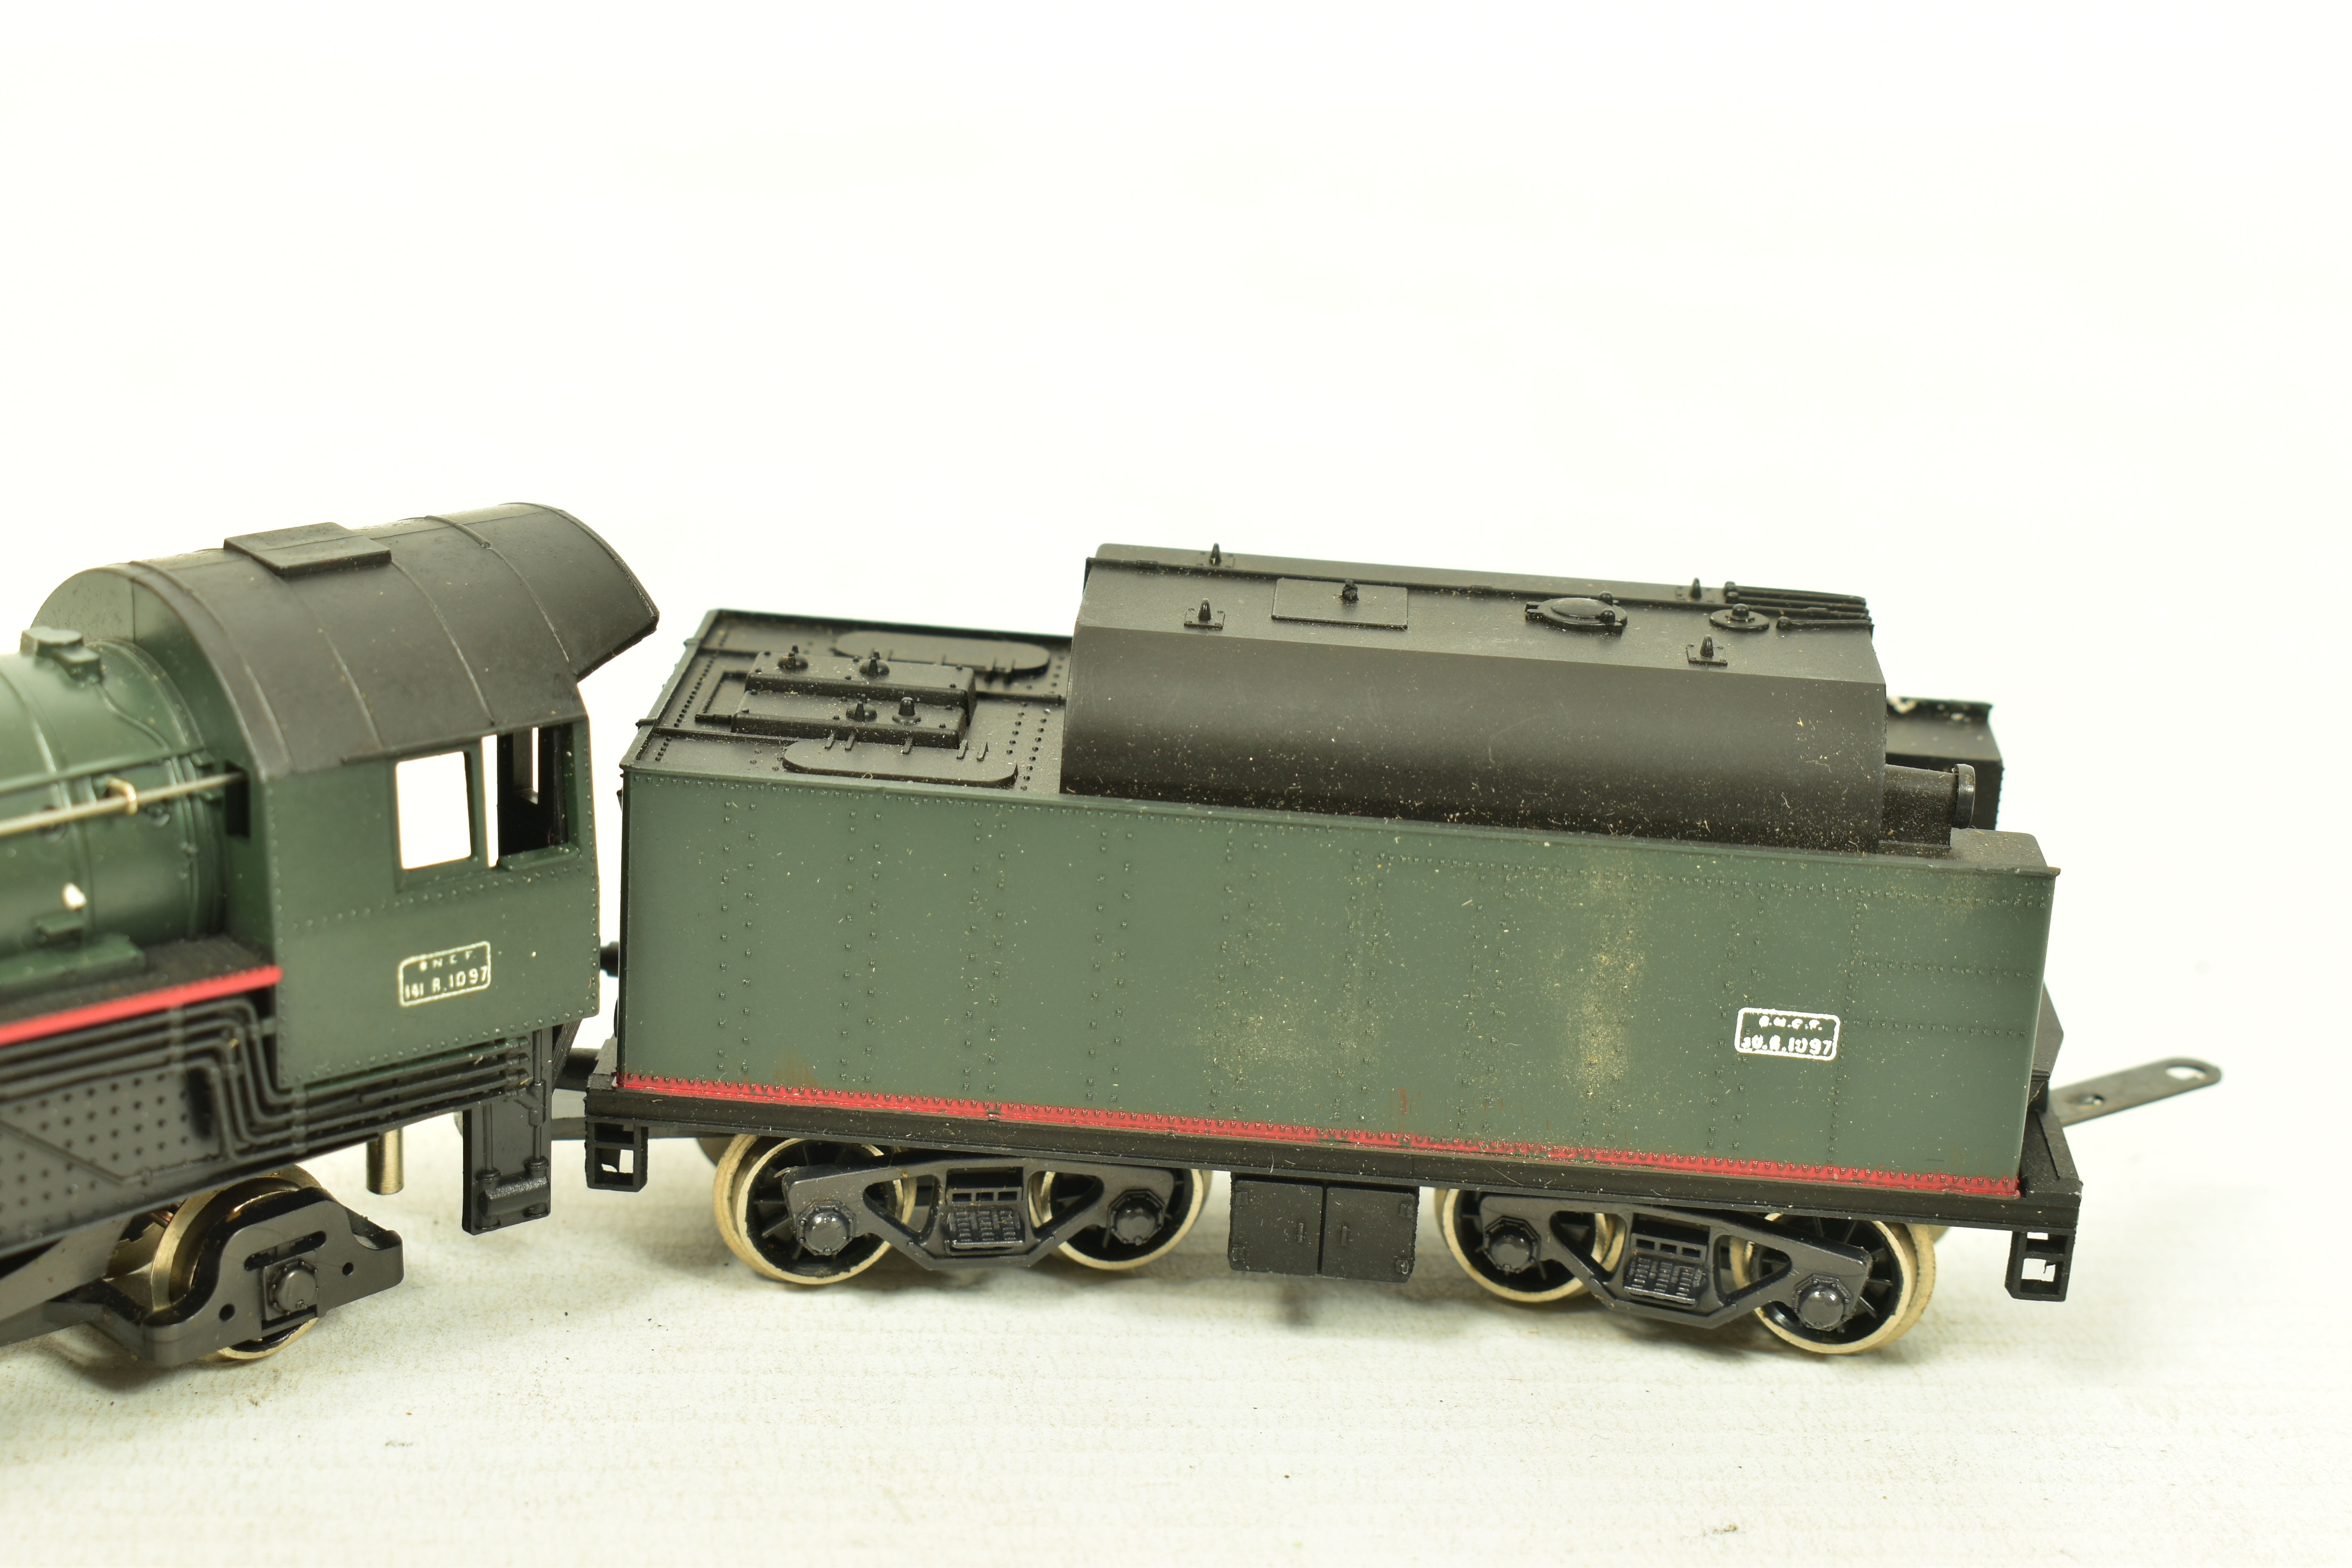 A BOXED LIMA HO GAUGE CLASS 141 LOCOMOTIVE AND TENDER, No.141 R 1097, S.N.C.F. green livery (3002L), - Image 5 of 8